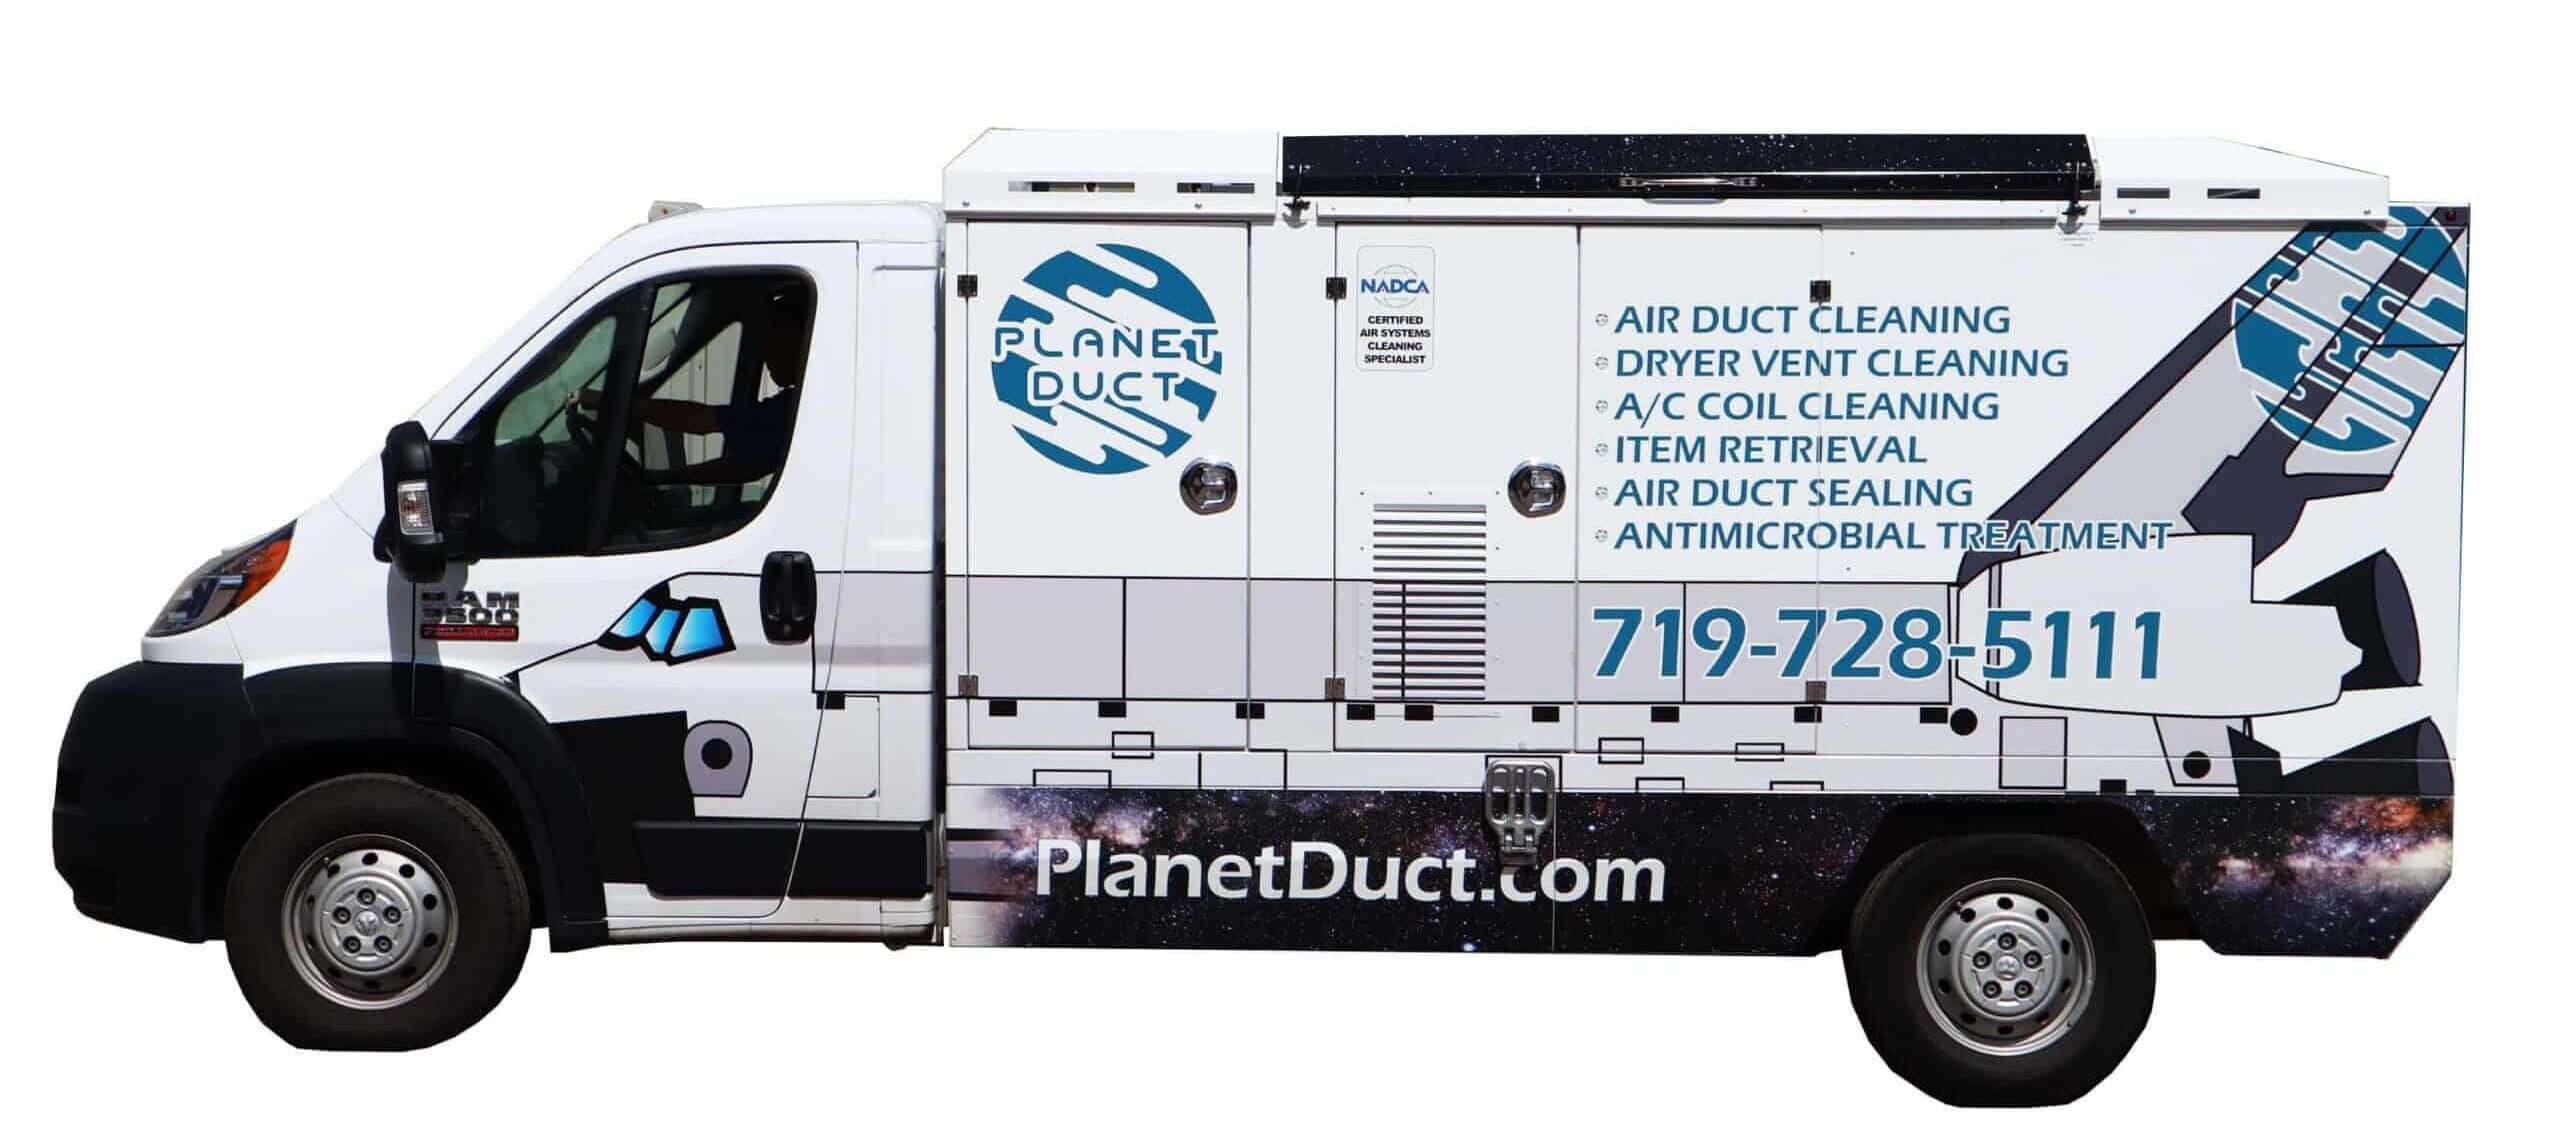 Planet Duct Vehicle